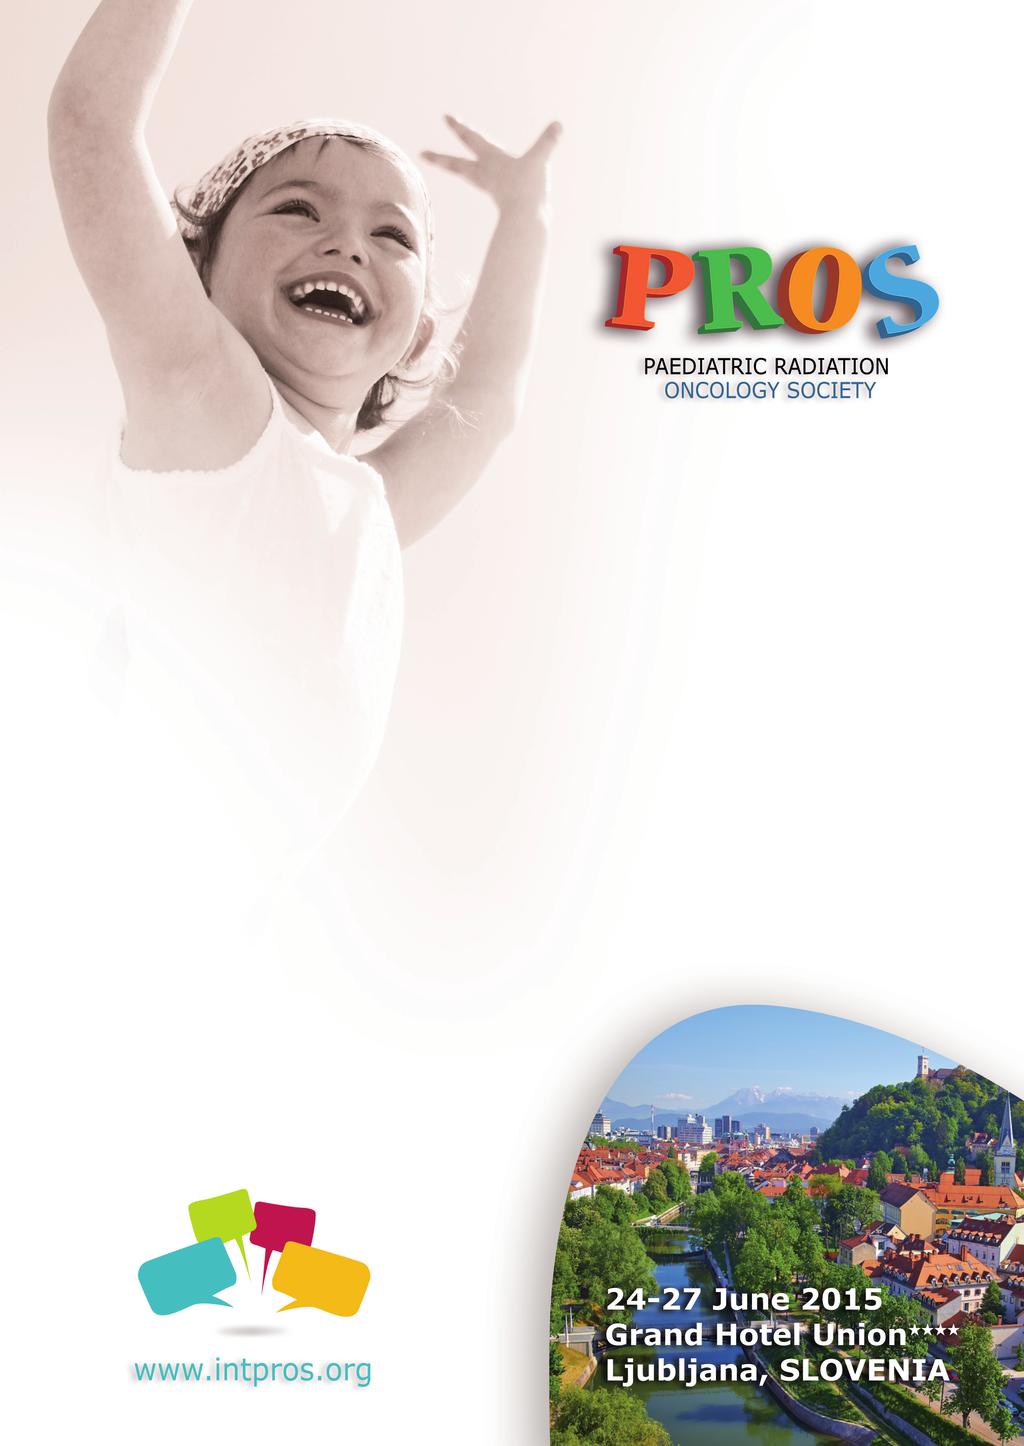 Chairs Welcome The 2015 PROS congress will be held in the beautiful city of Ljubljana, Slovenia.